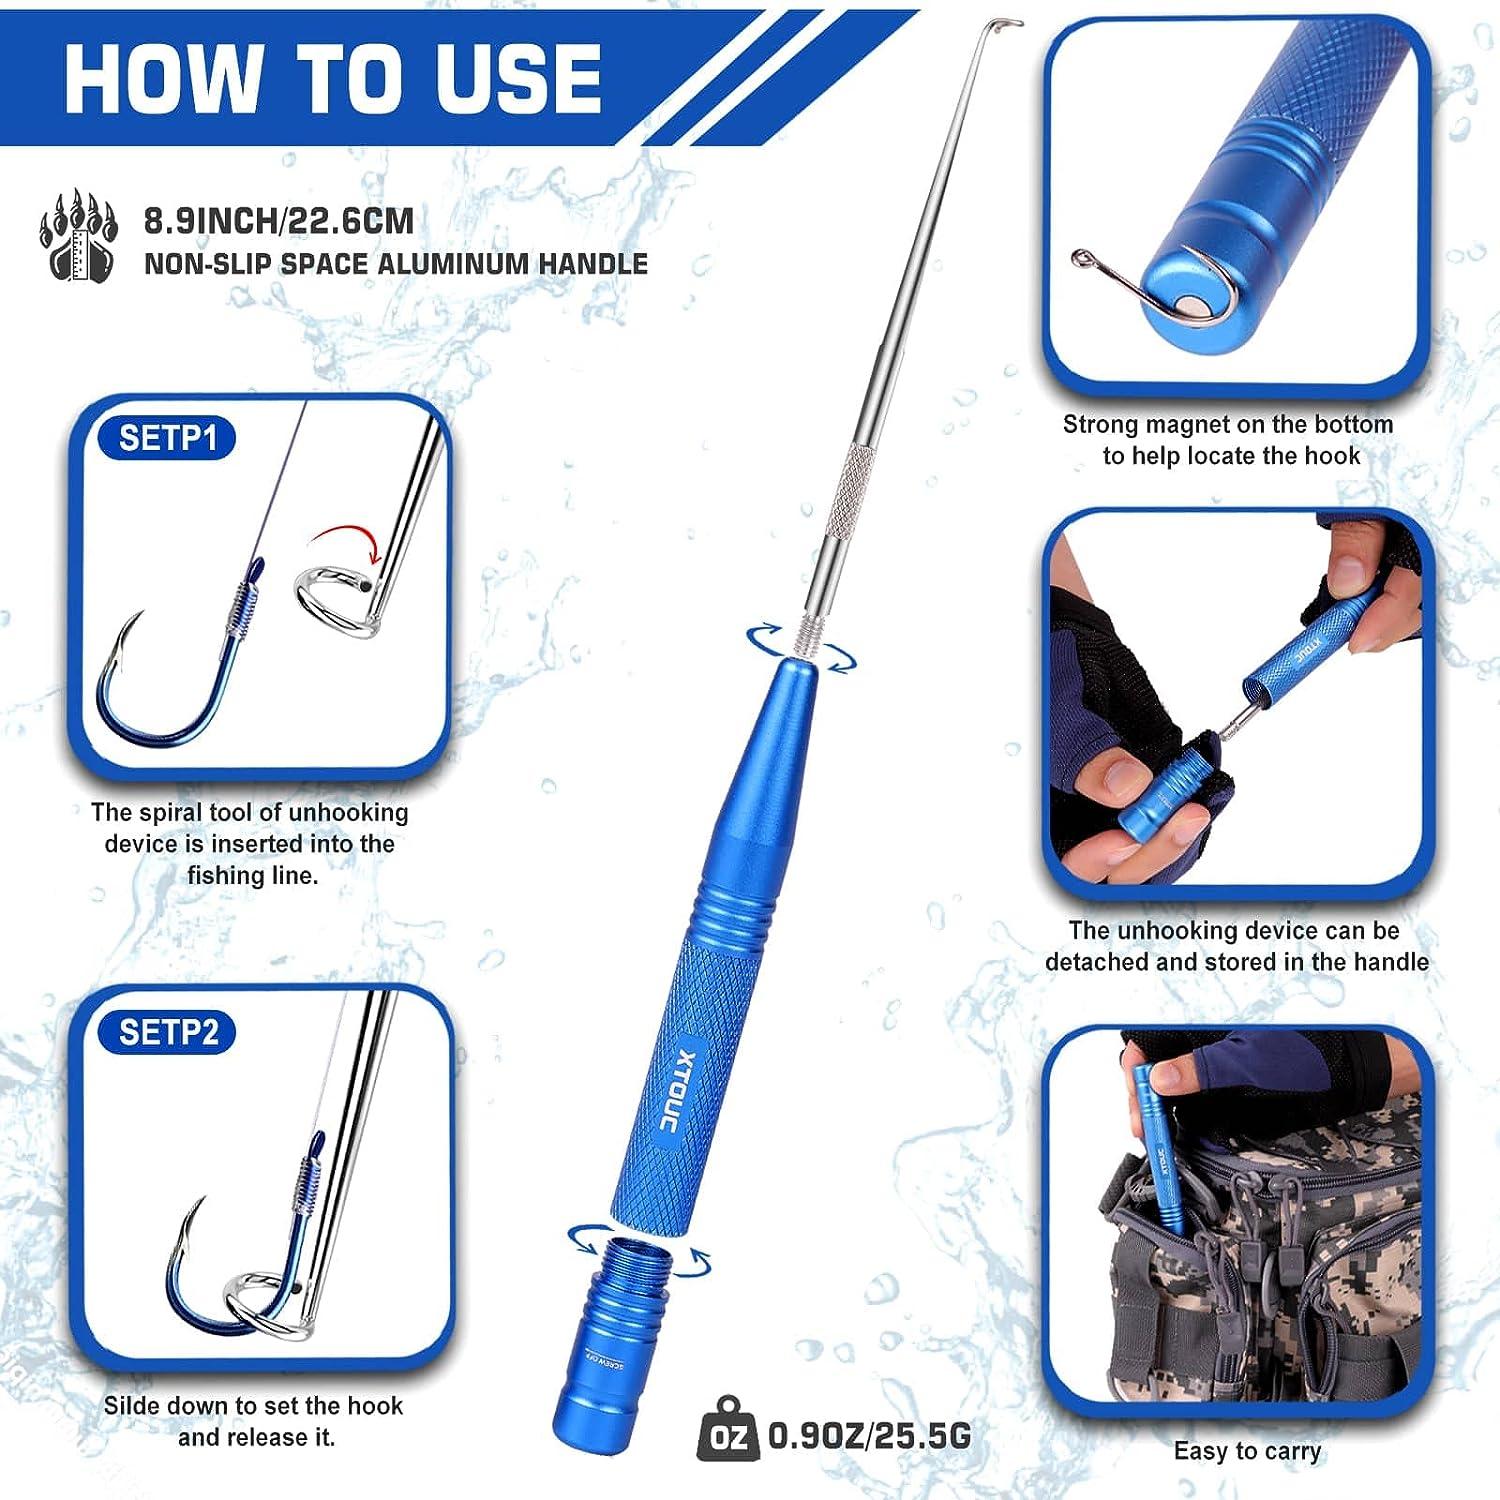 Fish Tackles Accessories, Fishing Hook Remover